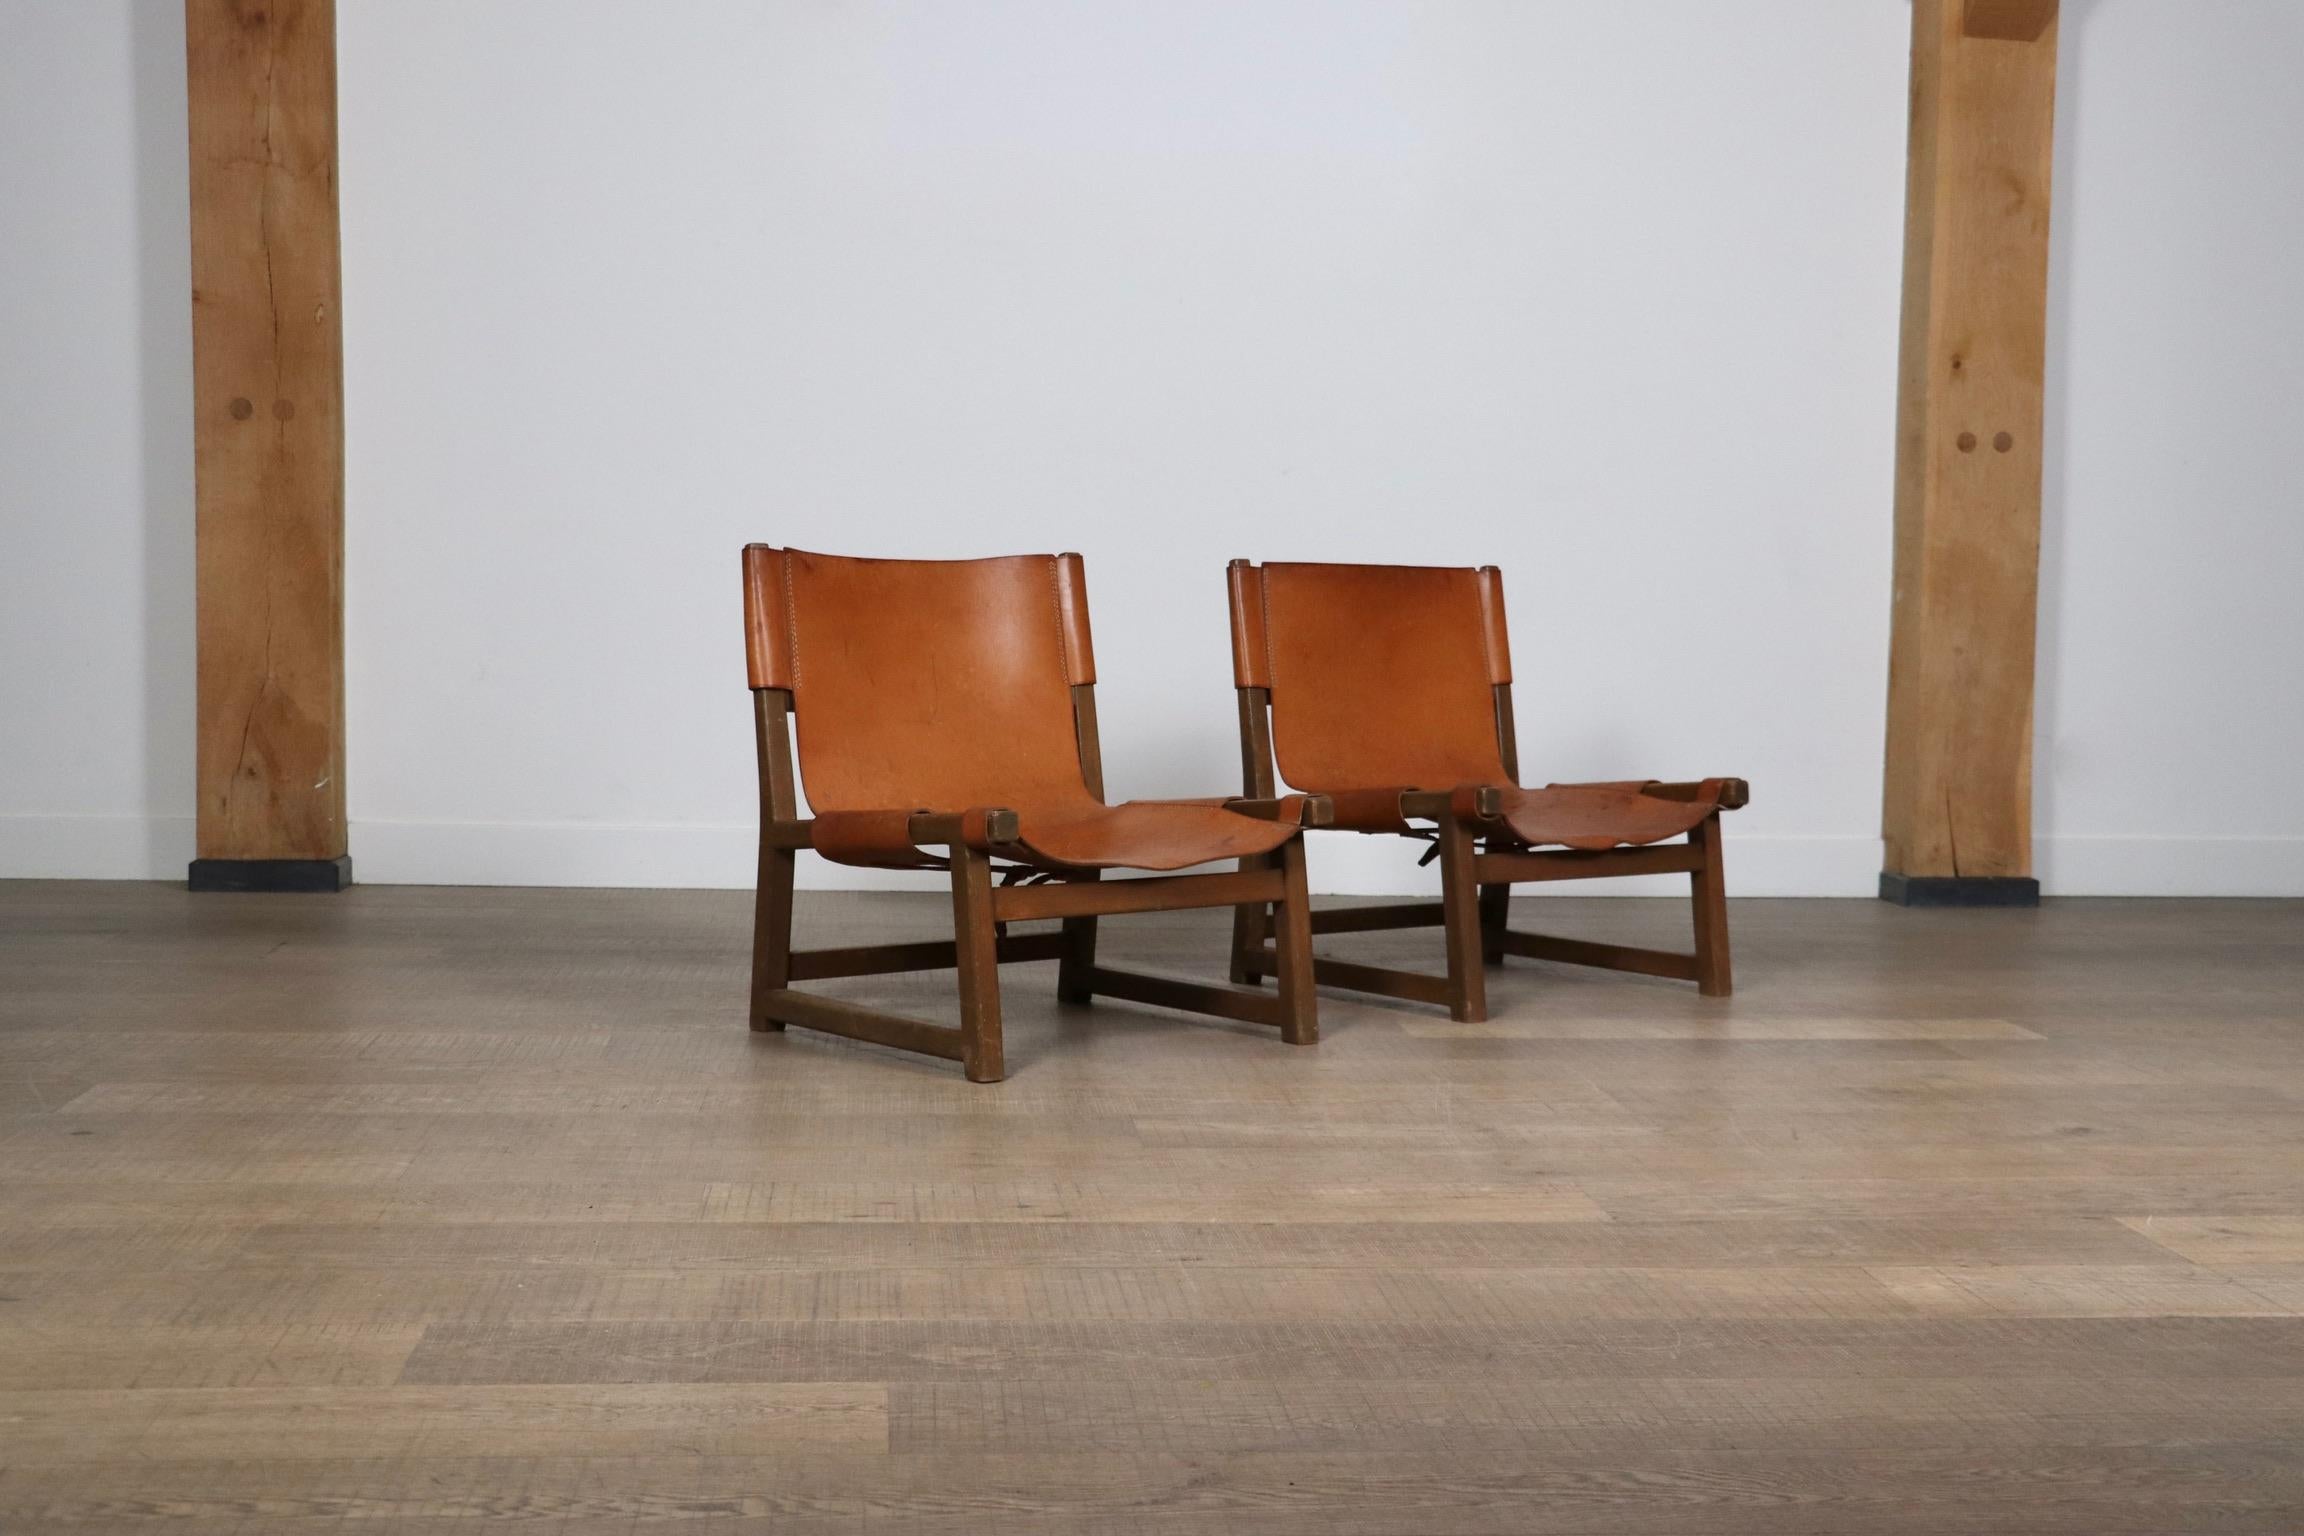 Pair Of Riaza Chairs In Cognac Leather By Paco Muñoz For Darro Gallery, Spain, 1 For Sale 5